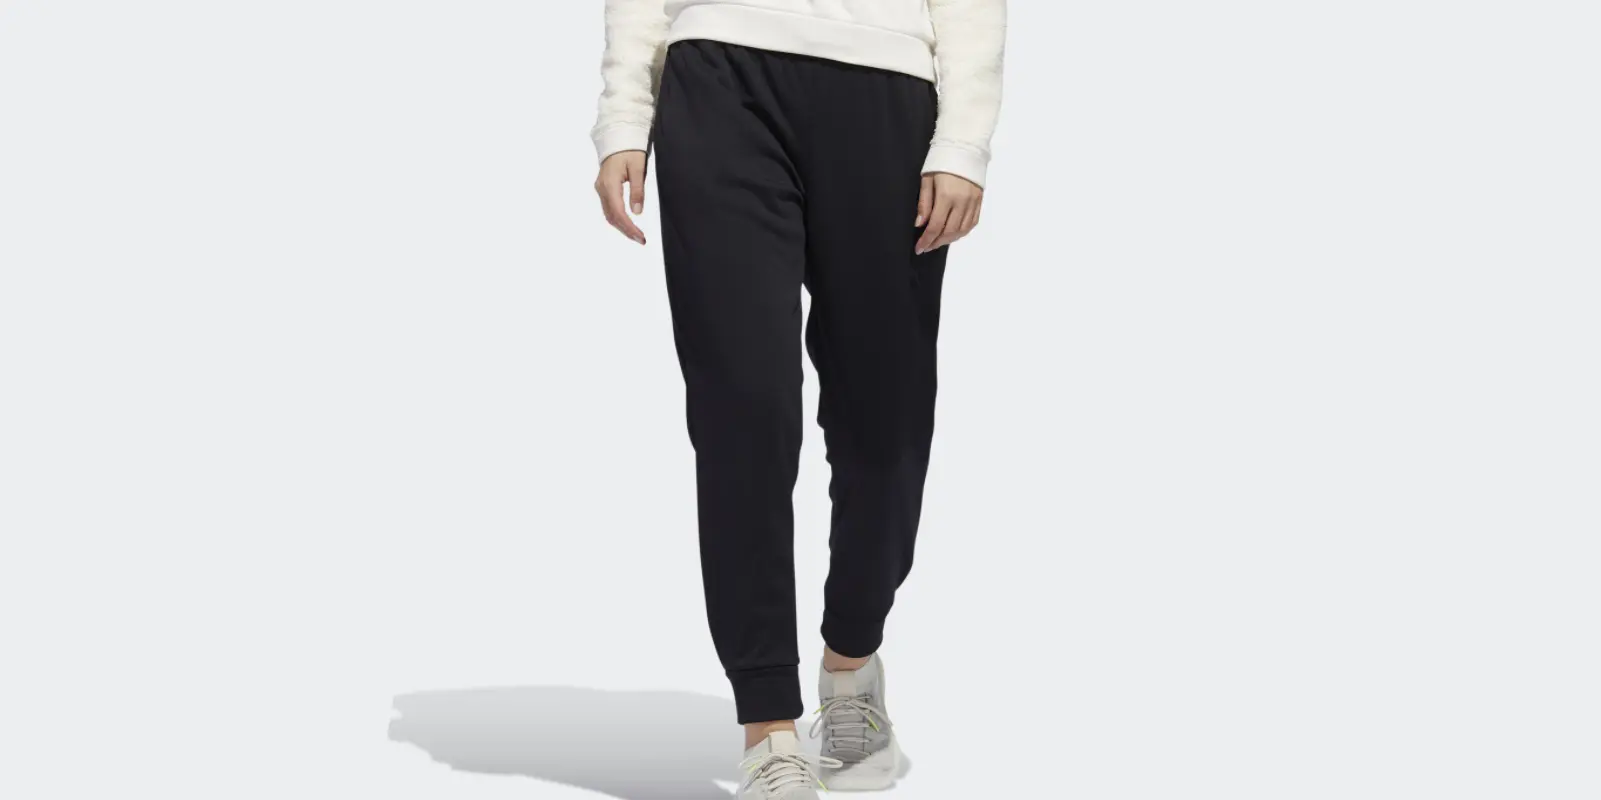 Ebay - 60% Off Adidas Women’s Team Issue Tapered Pants